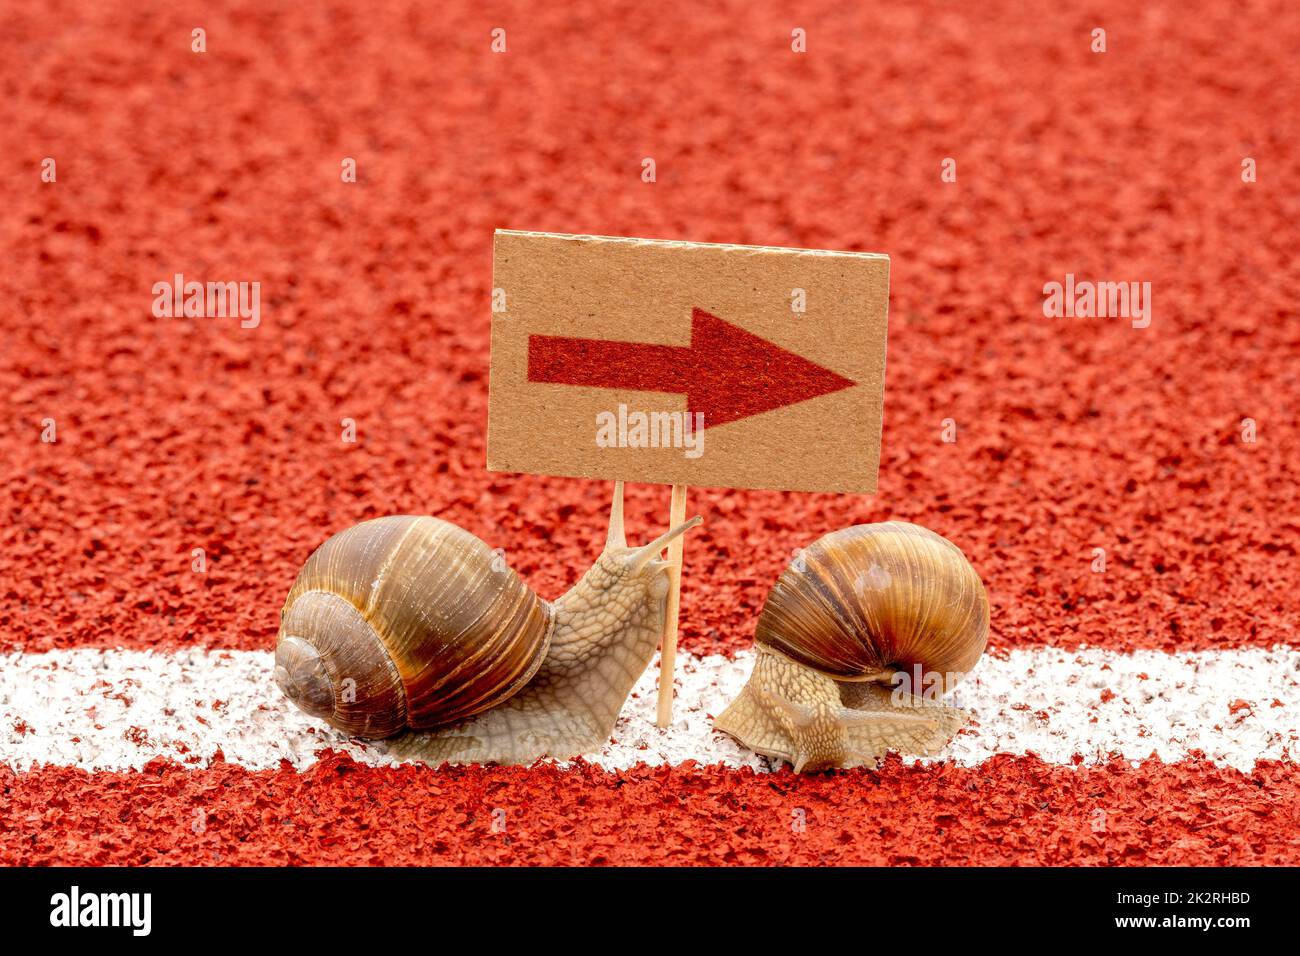 Two snails looking at sign with red arrow Stock Photo